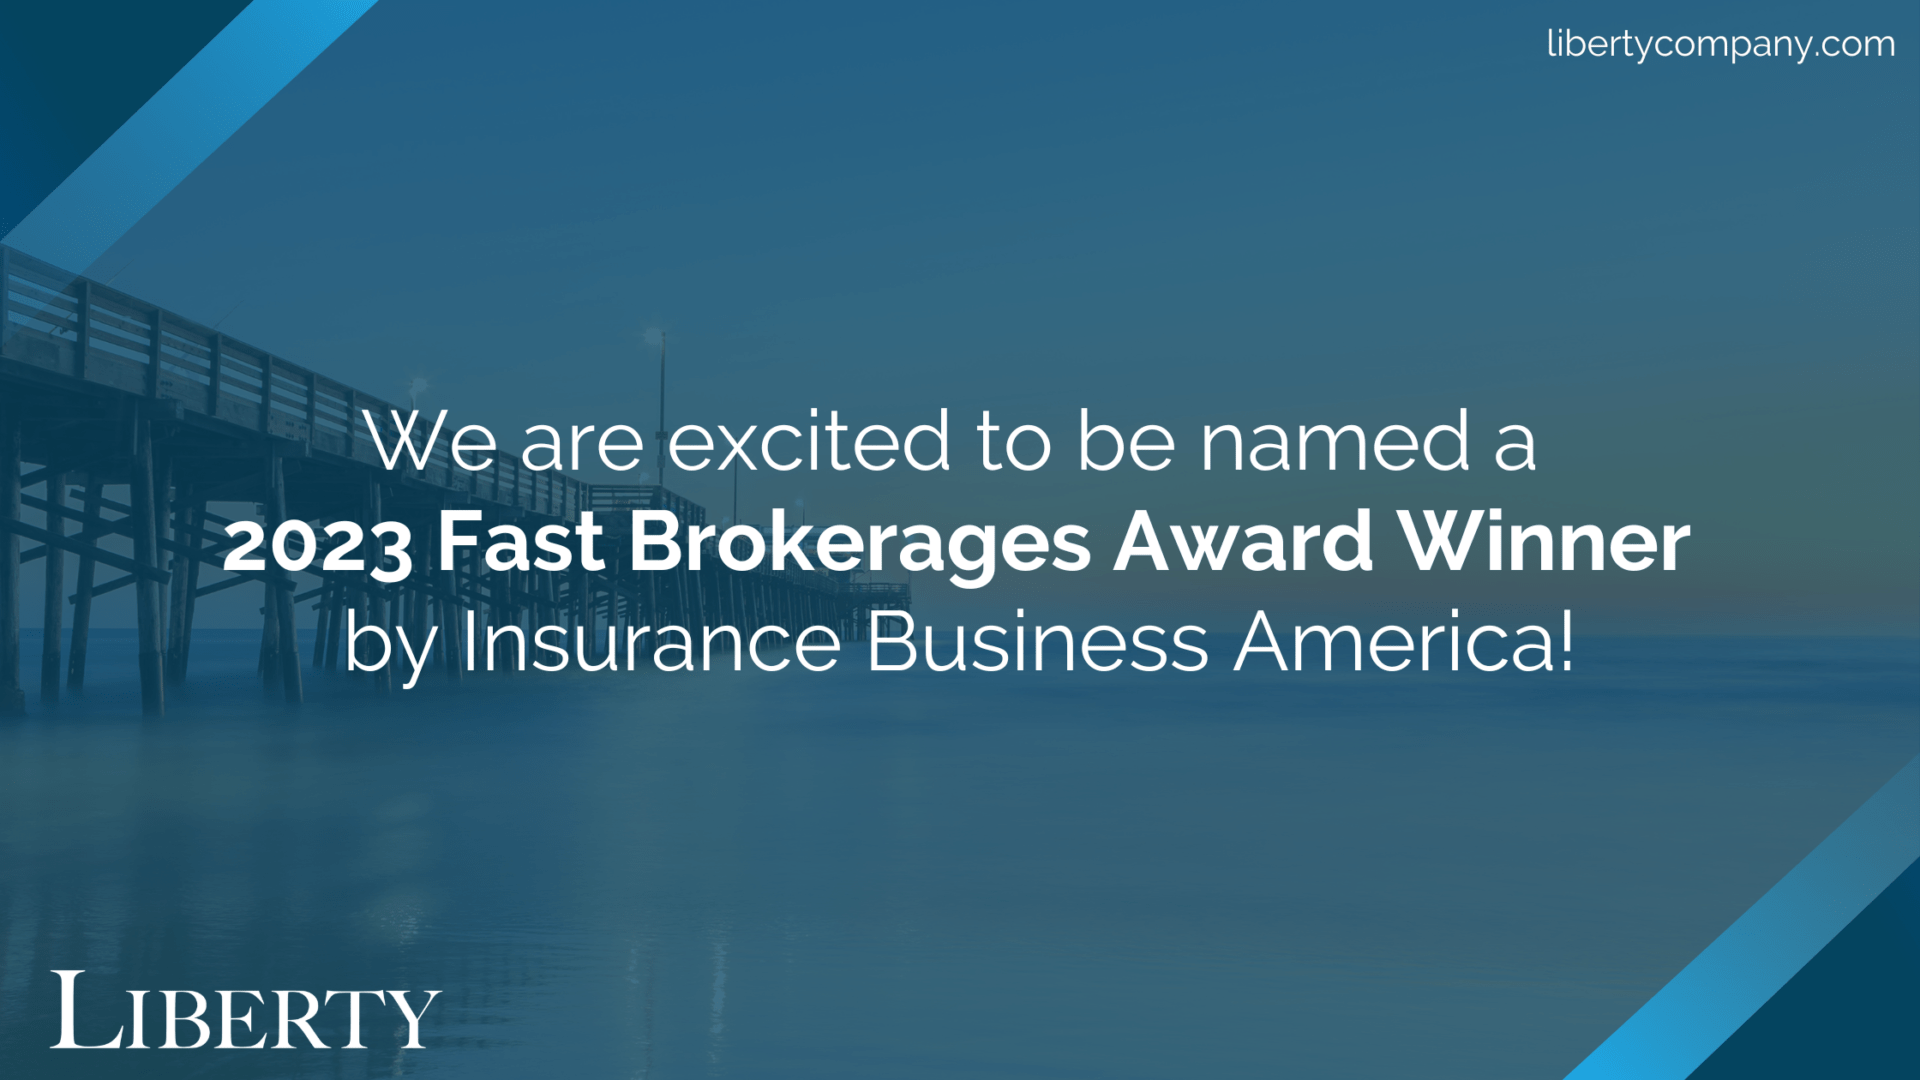 Liberty Named a 2023 Fast Brokerages Award Winner by Insurance Business America